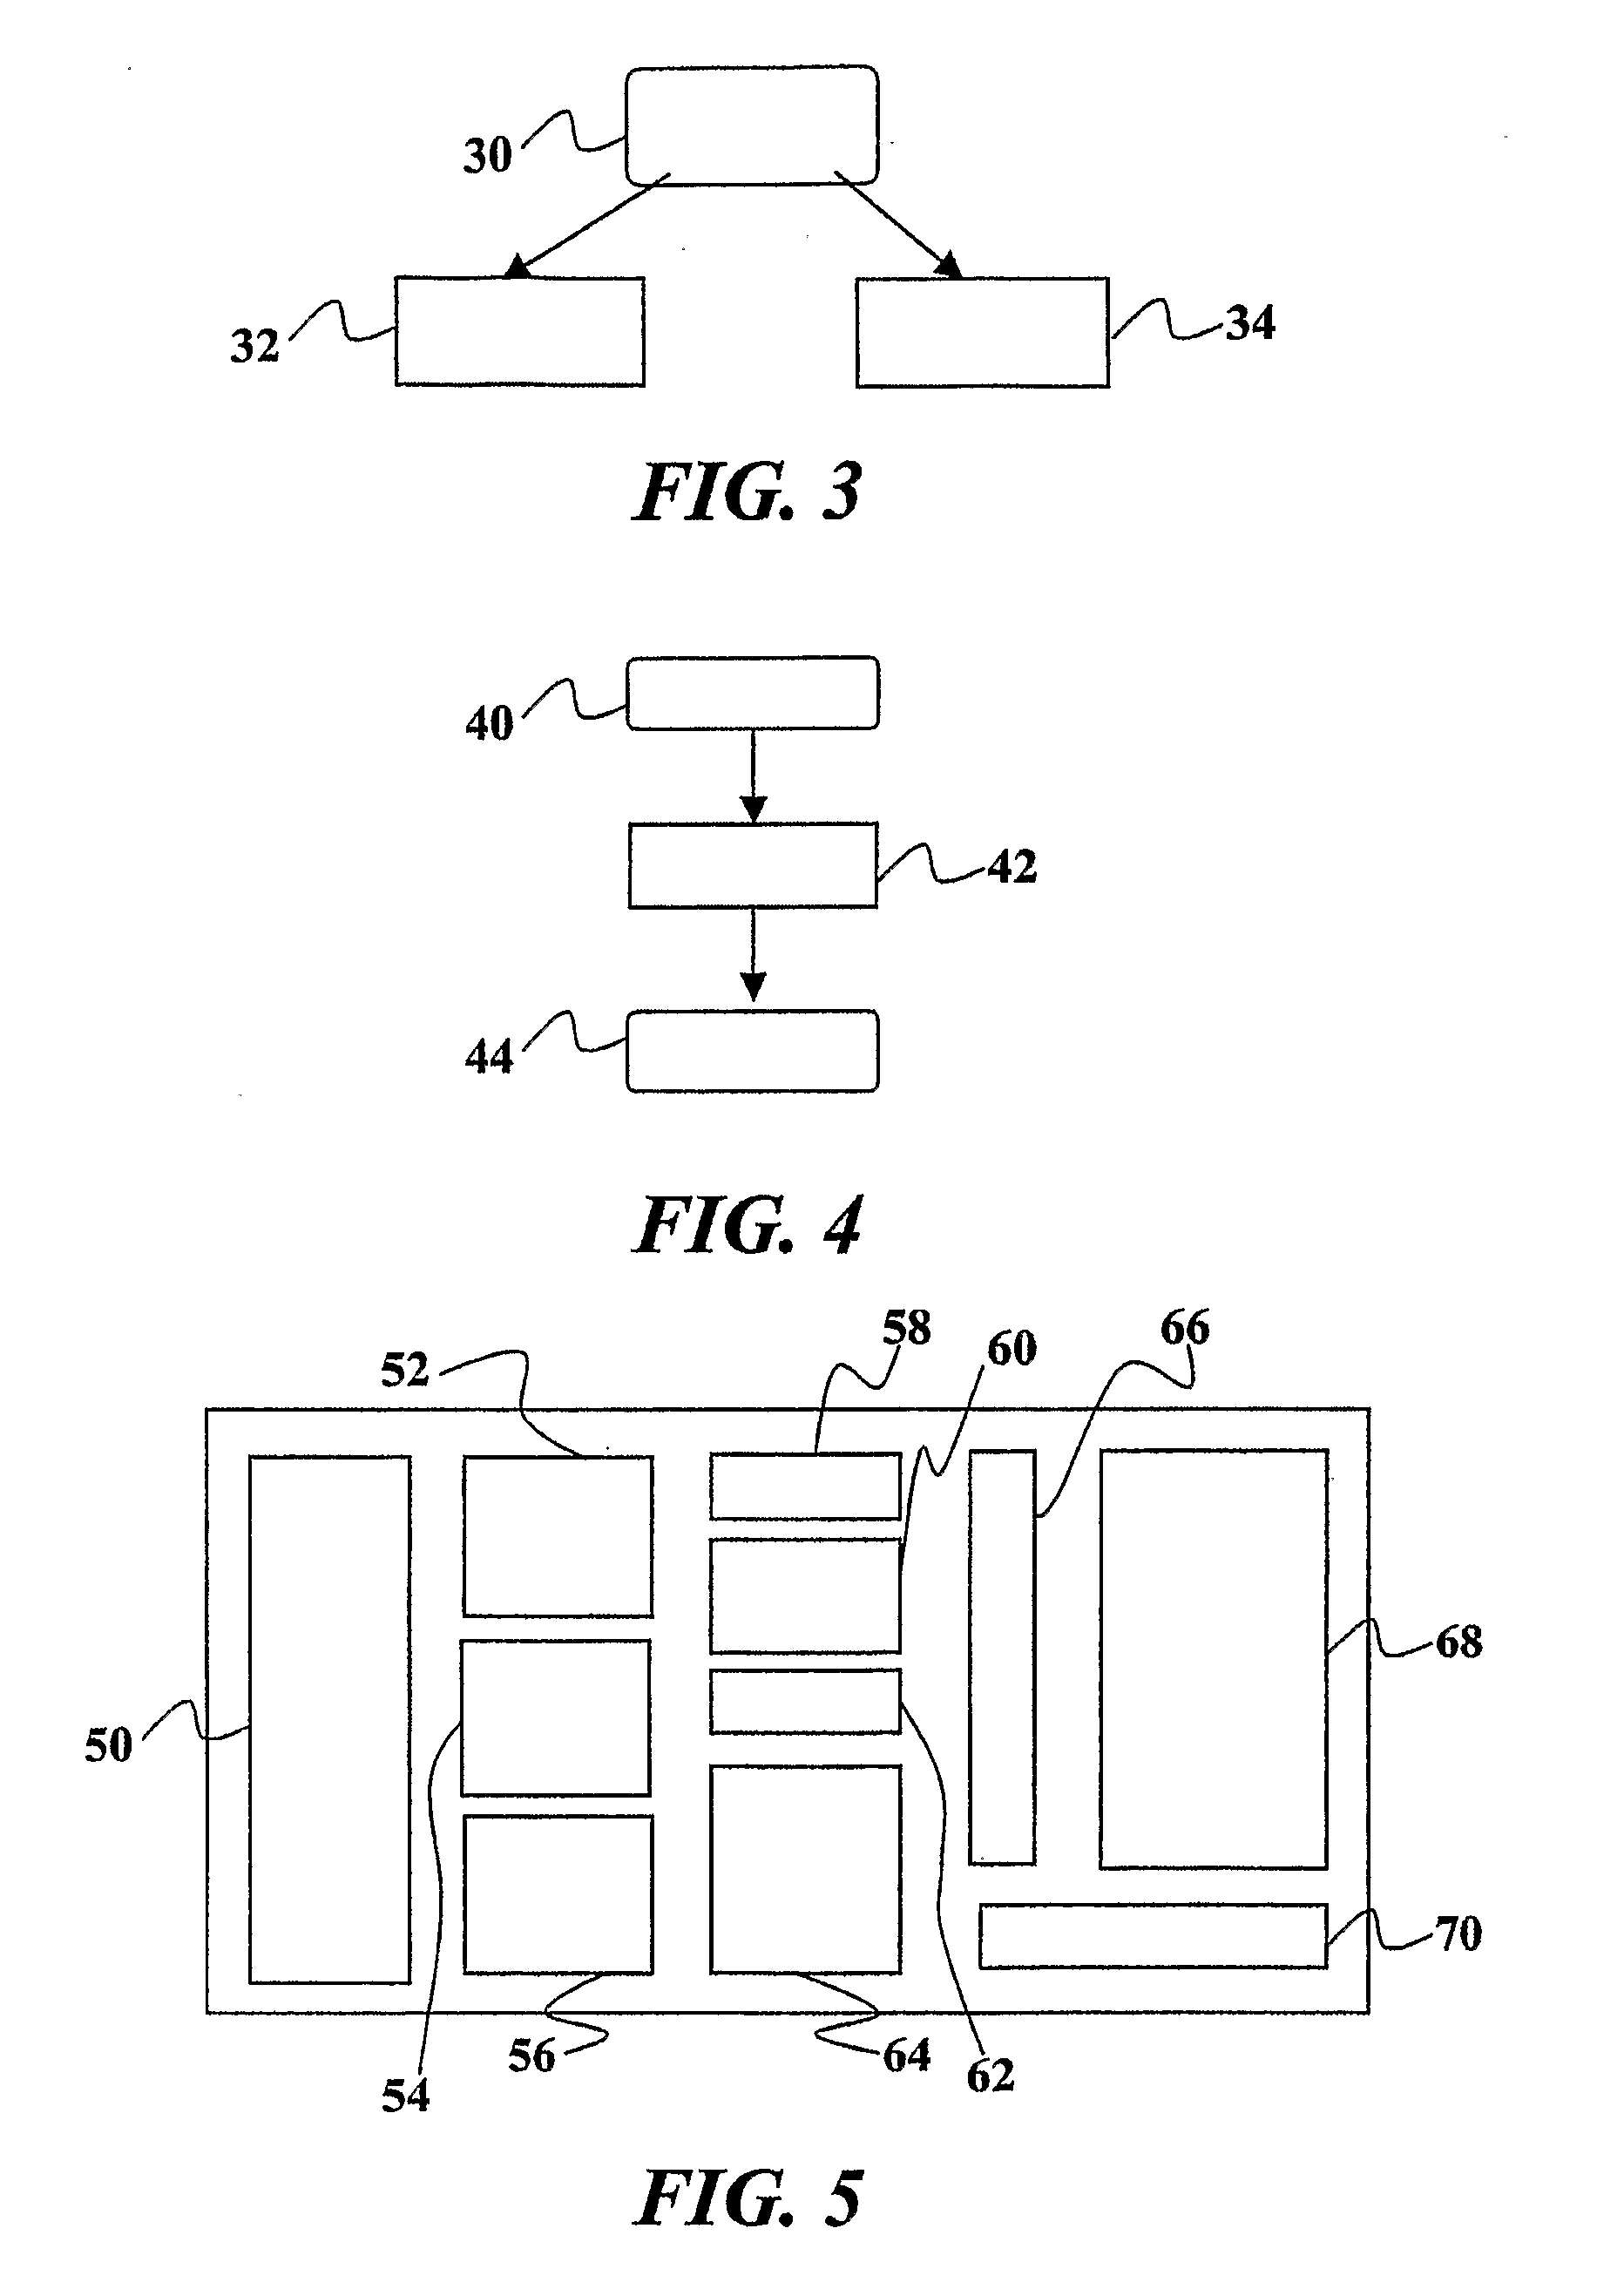 Method and System for Access Control and Data Protection in Digital Memories, Related Digital Memory and Computer Program Product Therefor